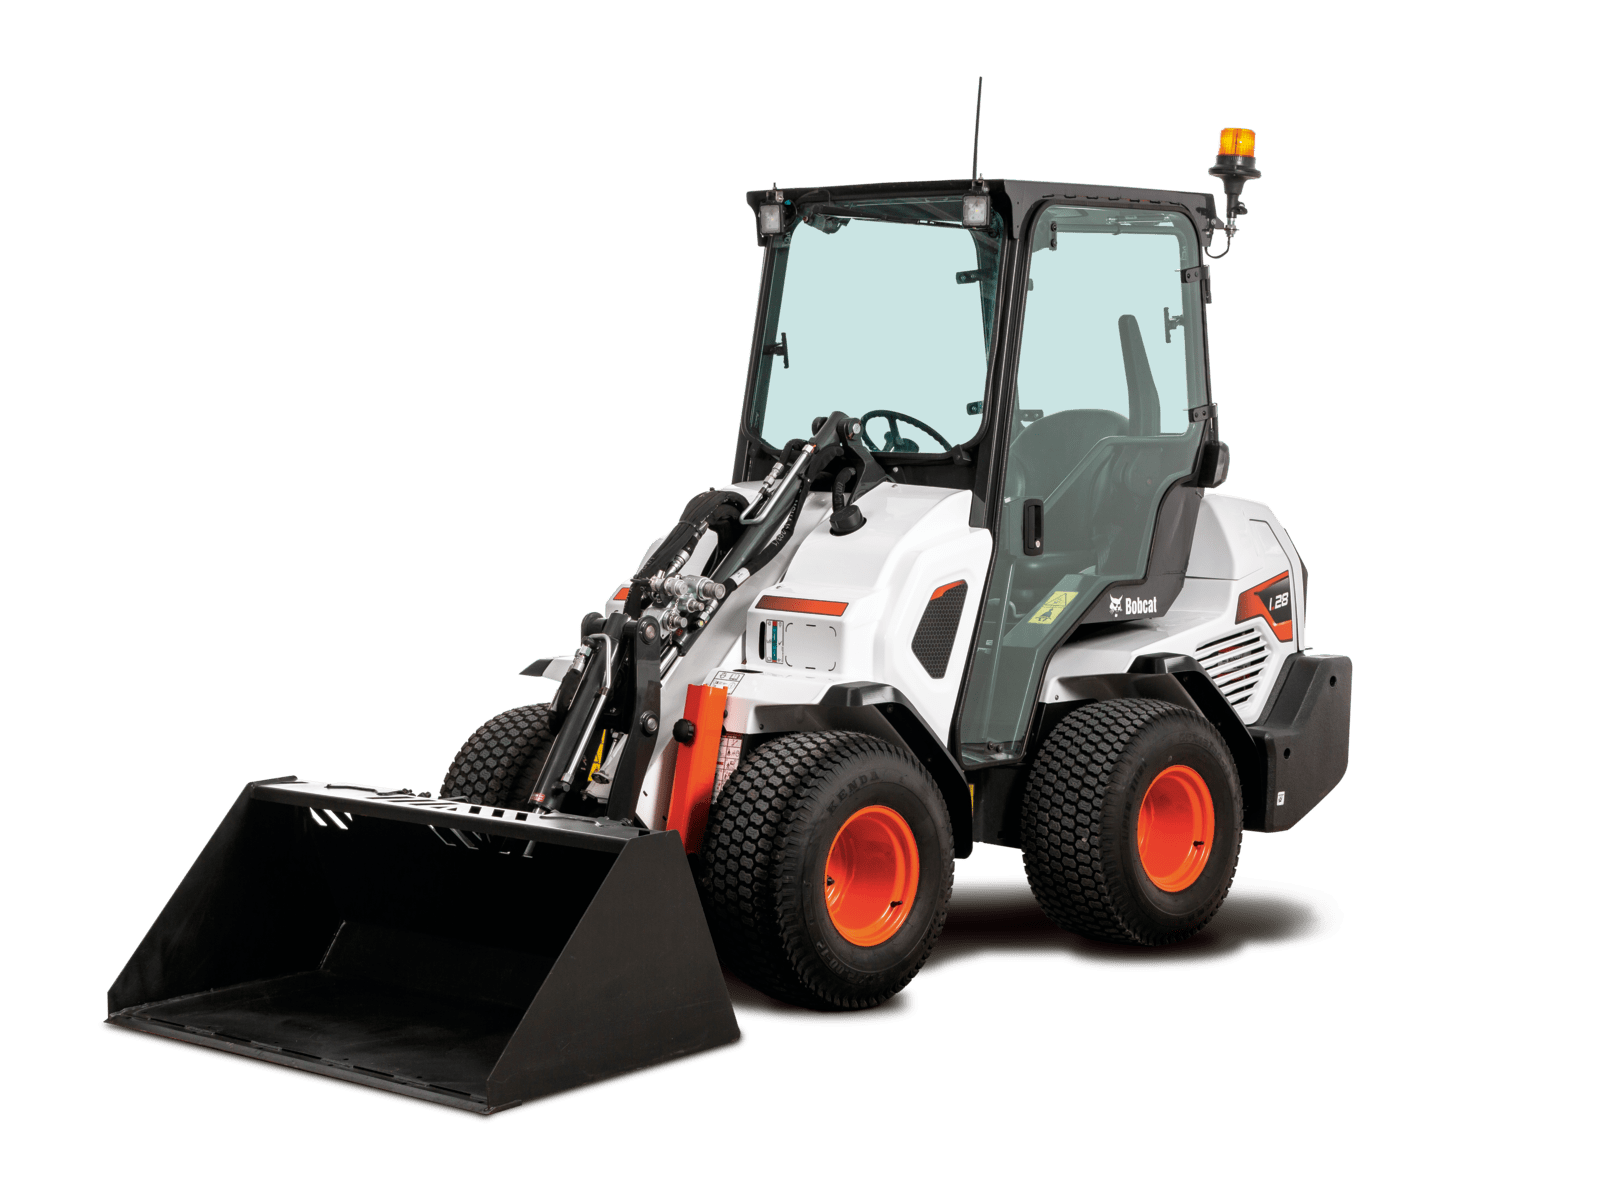 How To Replace Drive Belt on a Bobcat Loader - Bobcat Company